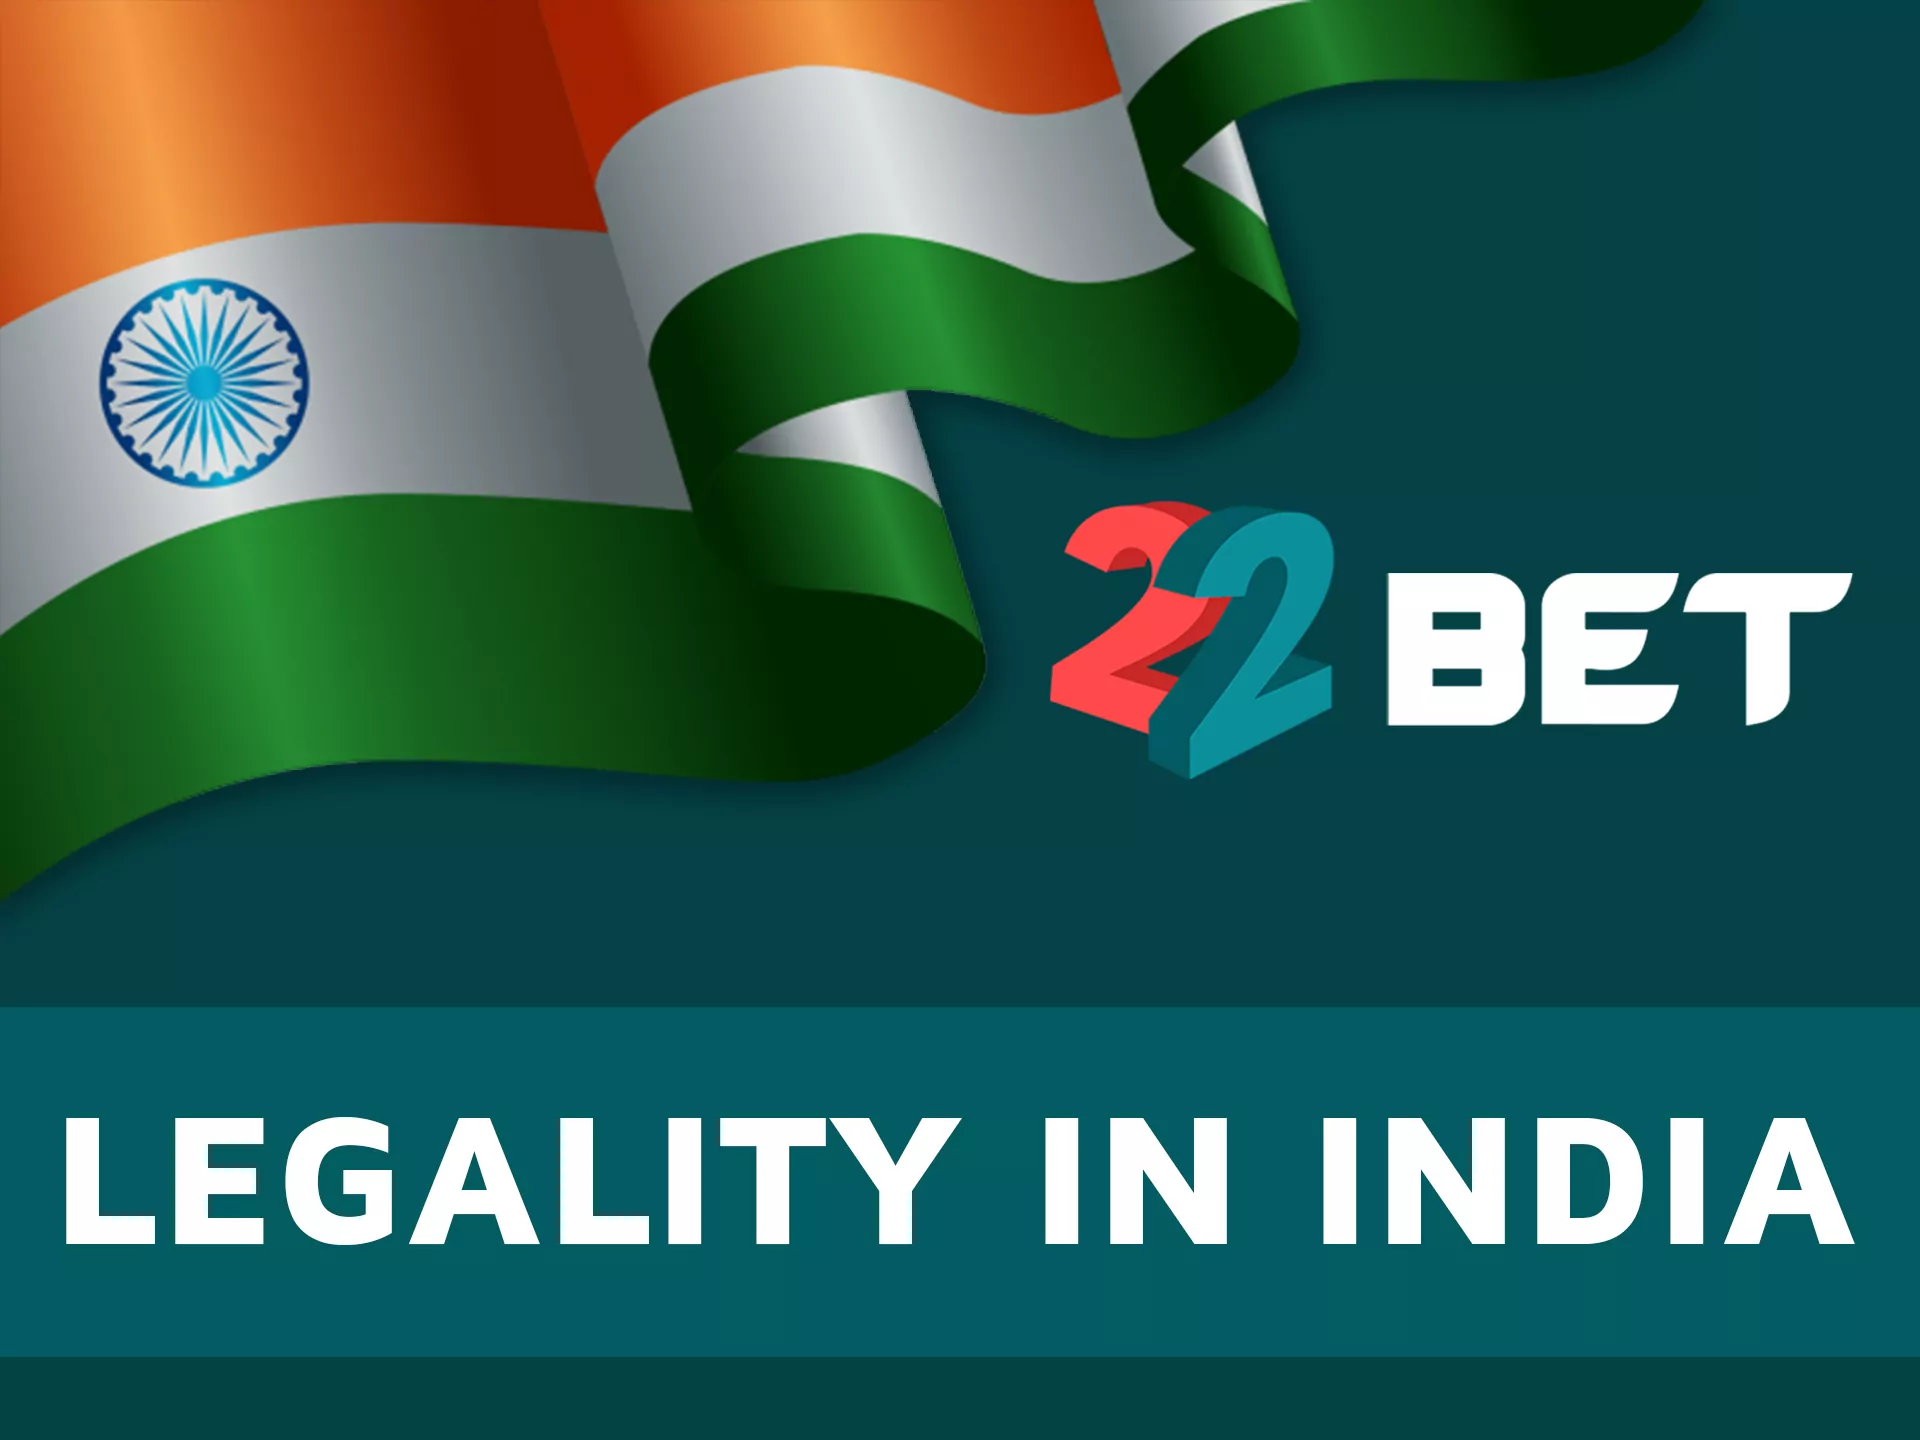 22bet is legal in India.